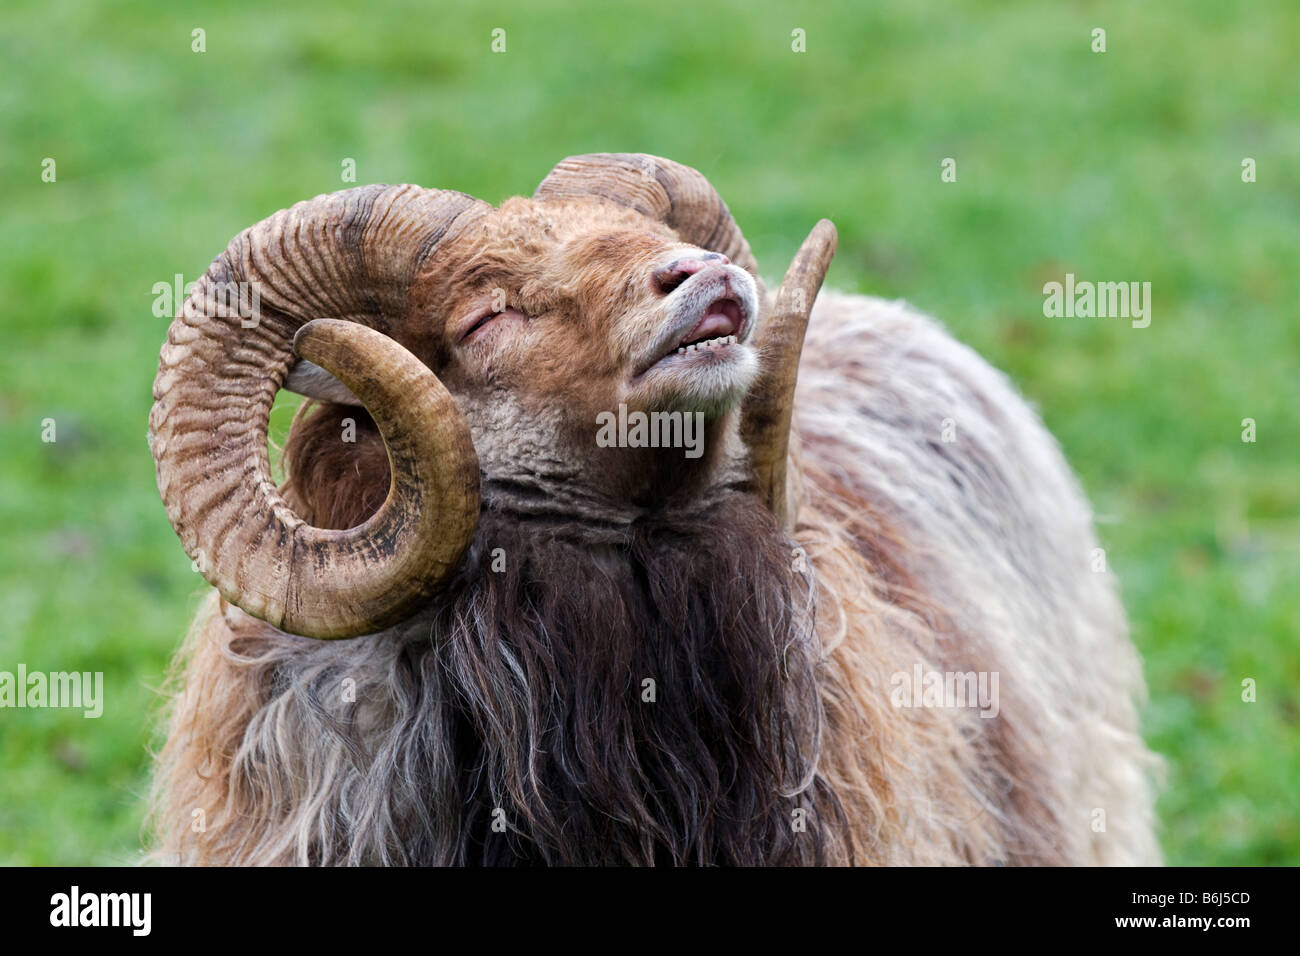 Head shot of a North Ronaldsay ram showing magnificent large curly horns, and his top lip curled up as he scent sniffs. Stock Photo